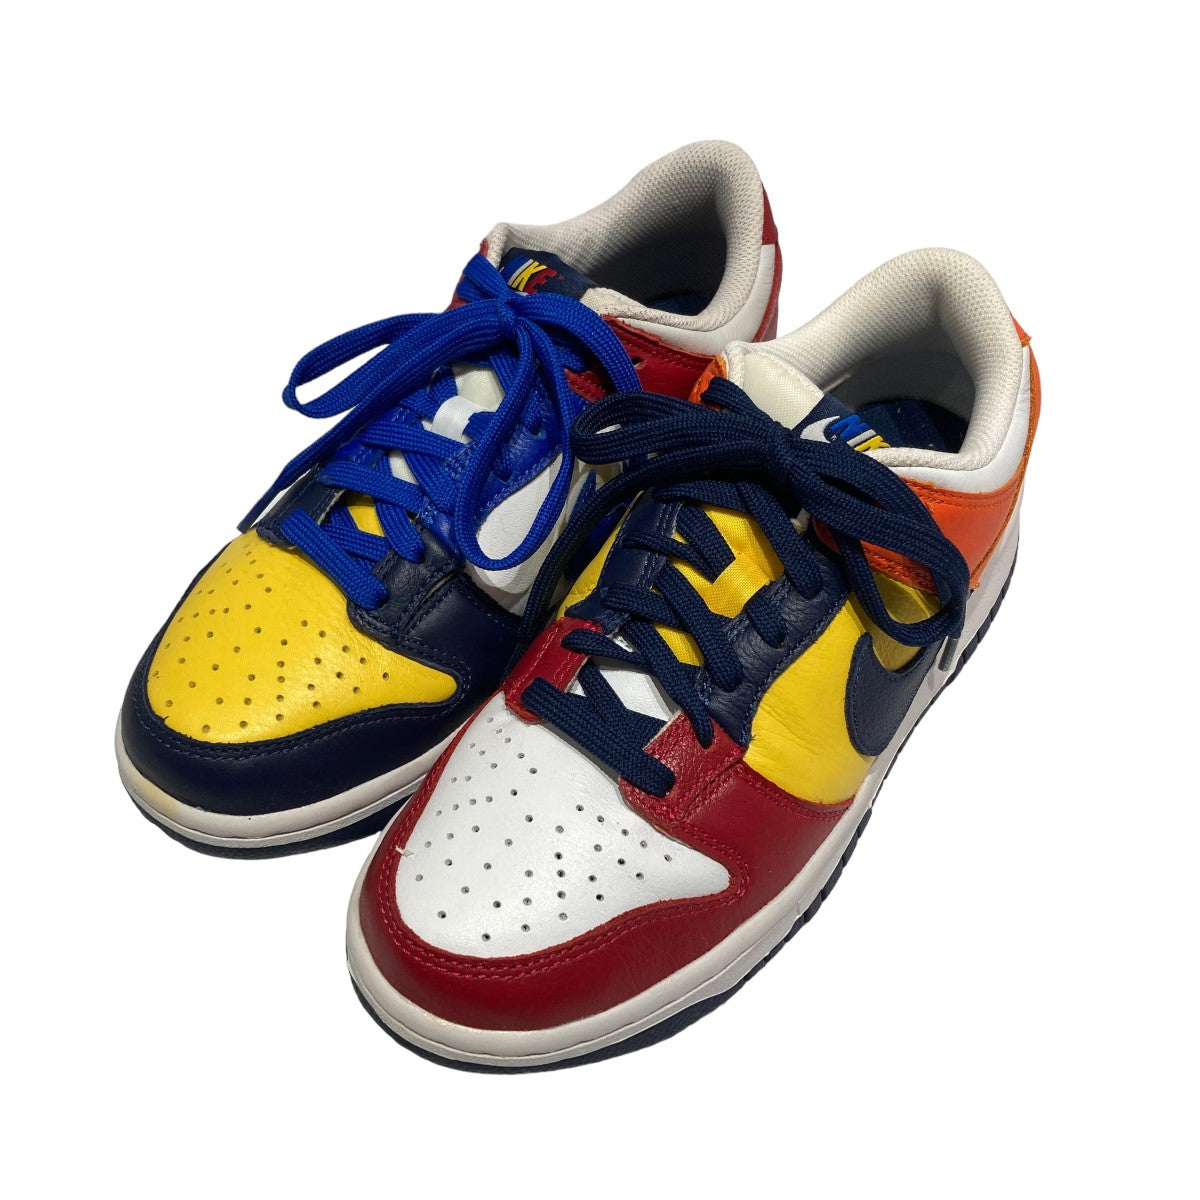 NIKE(ナイキ) DUNK LOW JP QS WHAT THE ダンク ロー JP／aa4414-400 